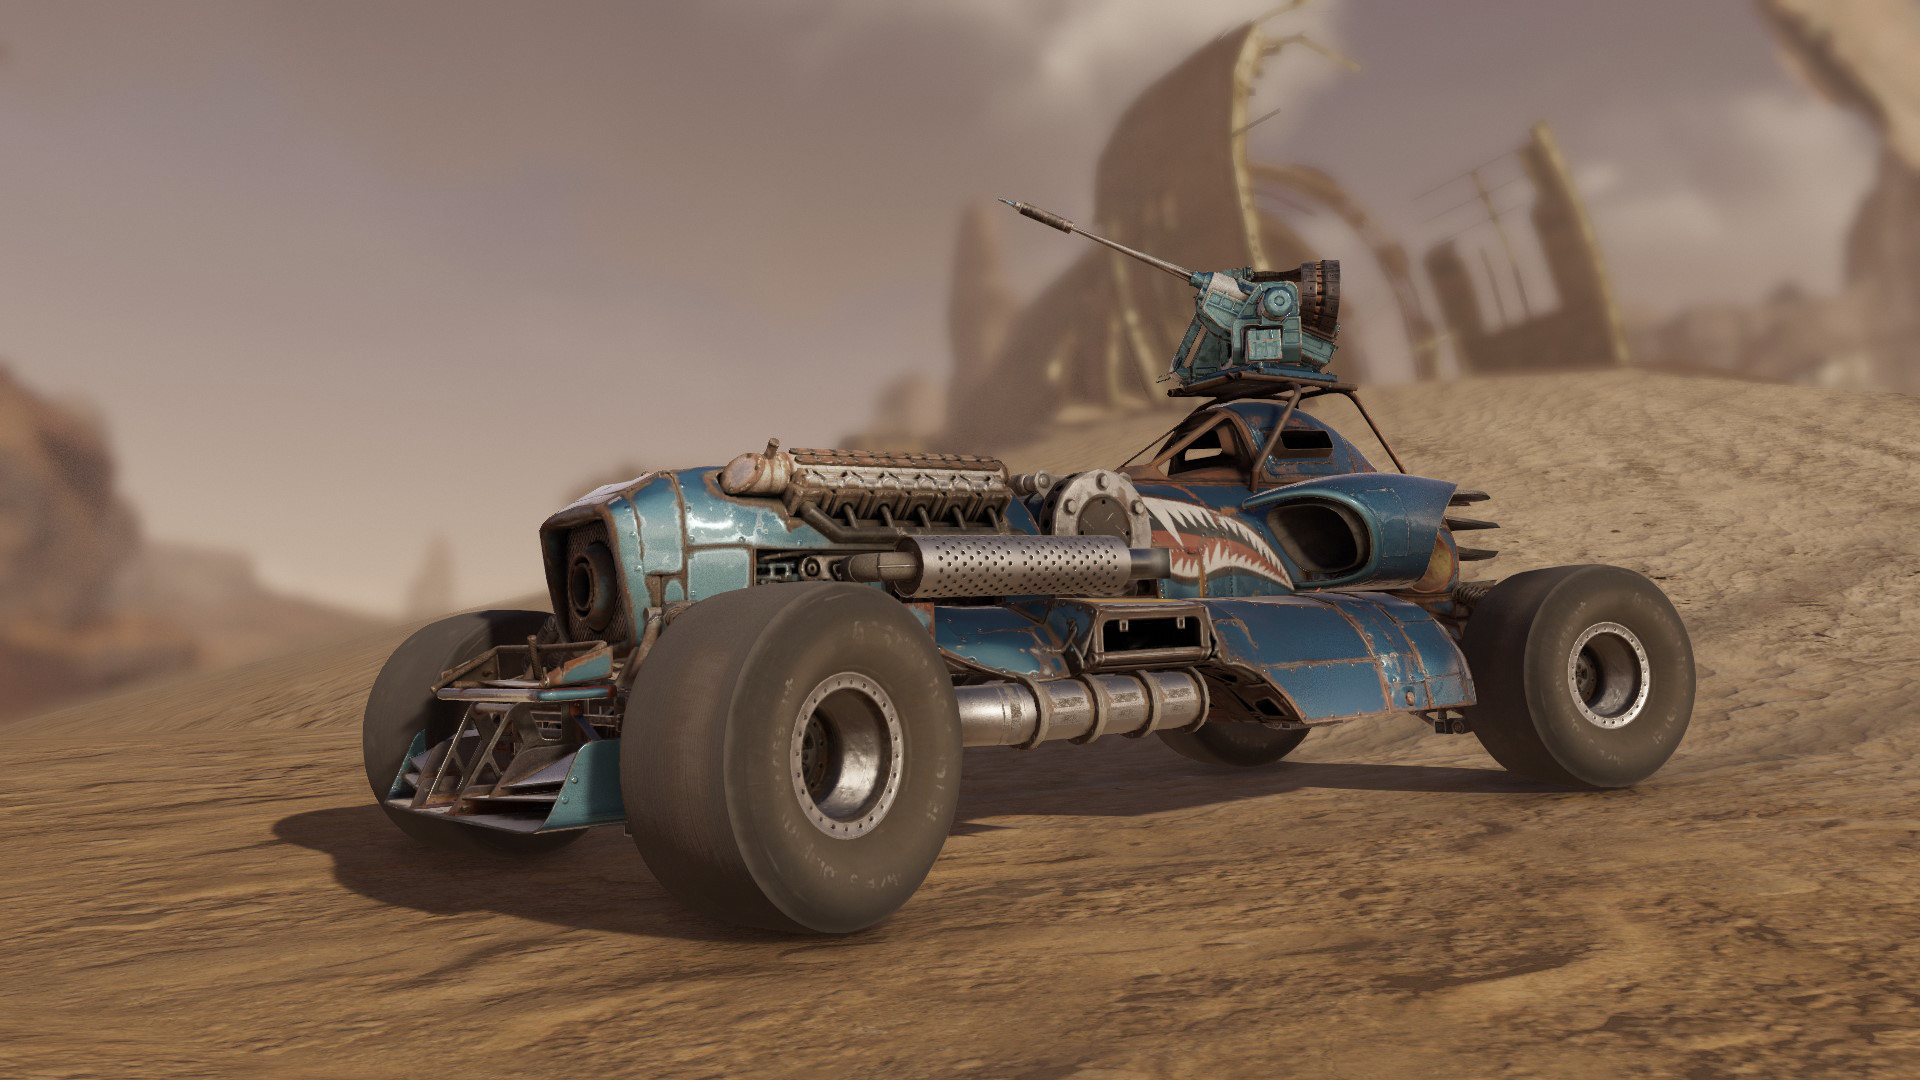 download free crossout twitter